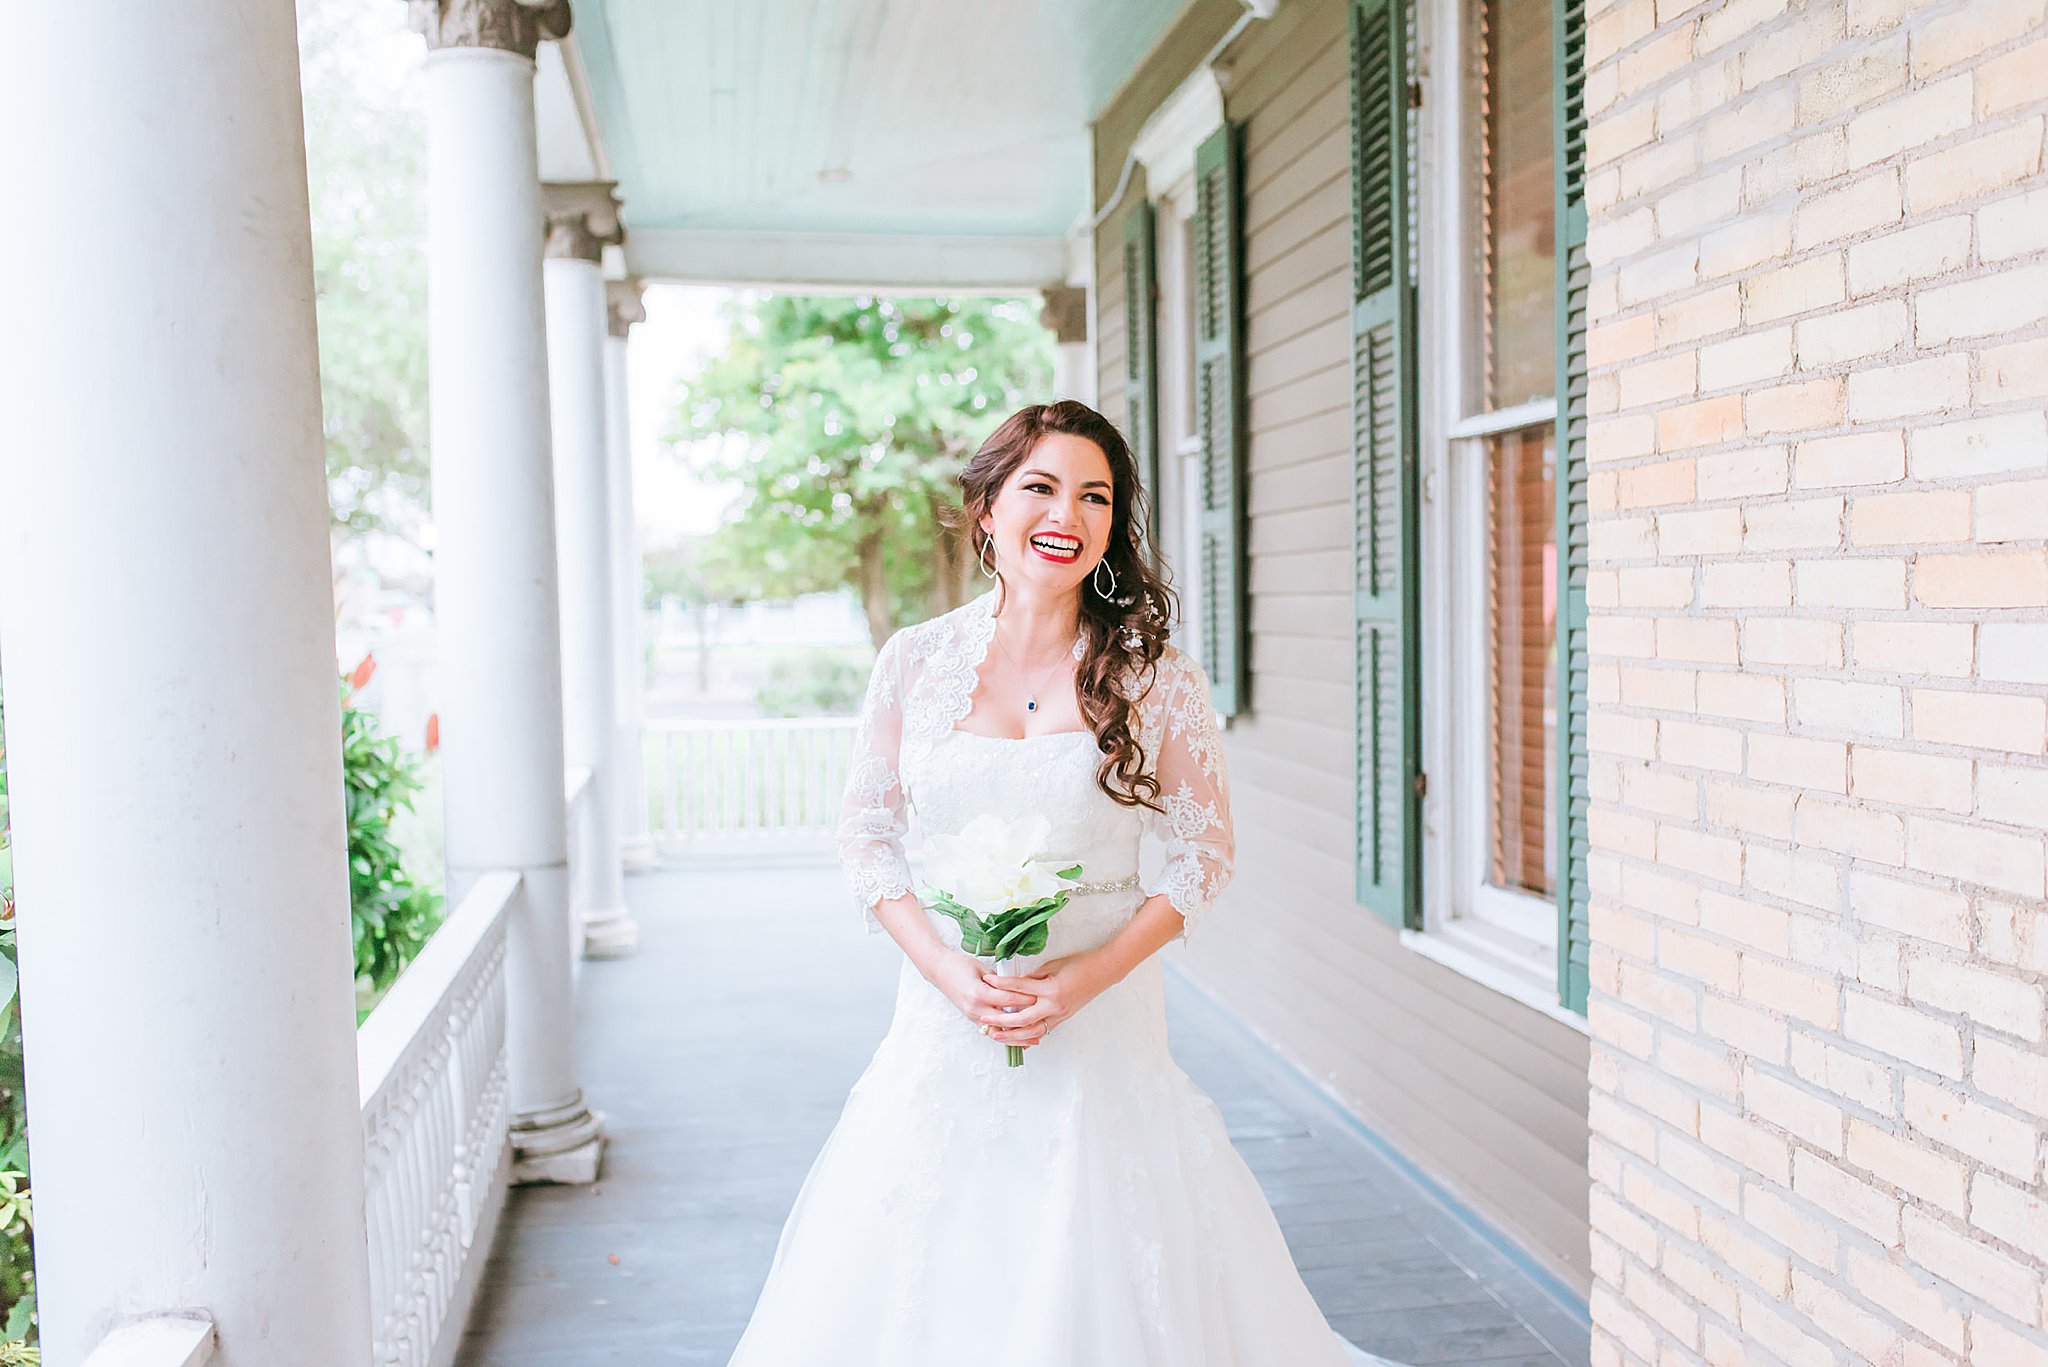 Bride in wedding dress holding a white bouquet on the patio of the Heritage Park house in Corpus Christi, Texas